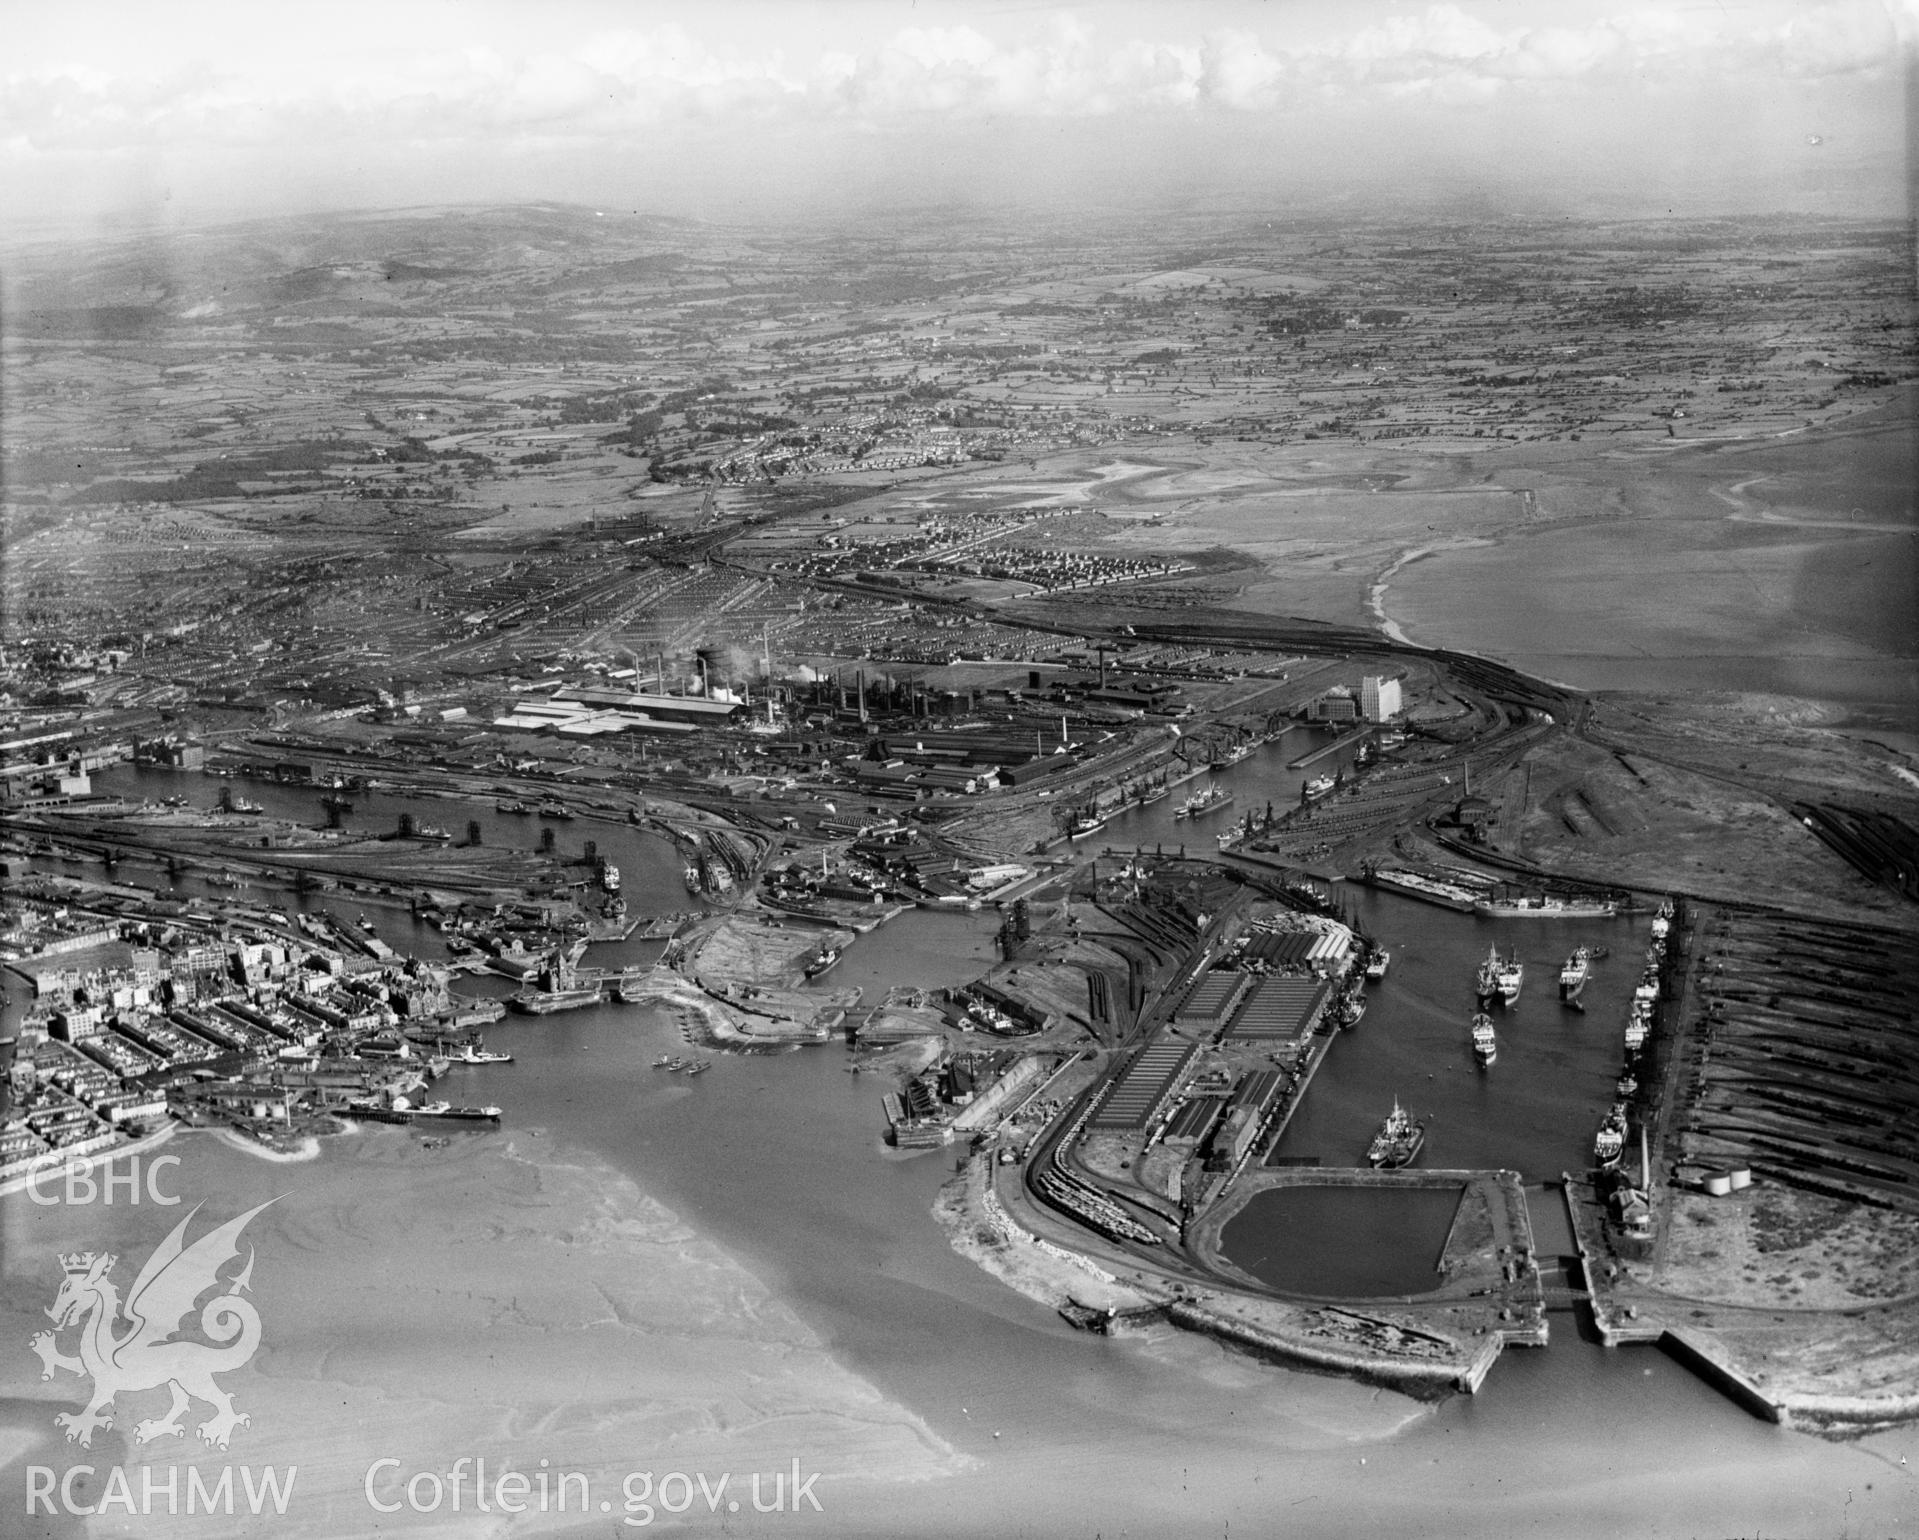 General view of Cardiff showing docks, oblique aerial view. 5?x4? black and white glass plate negative.